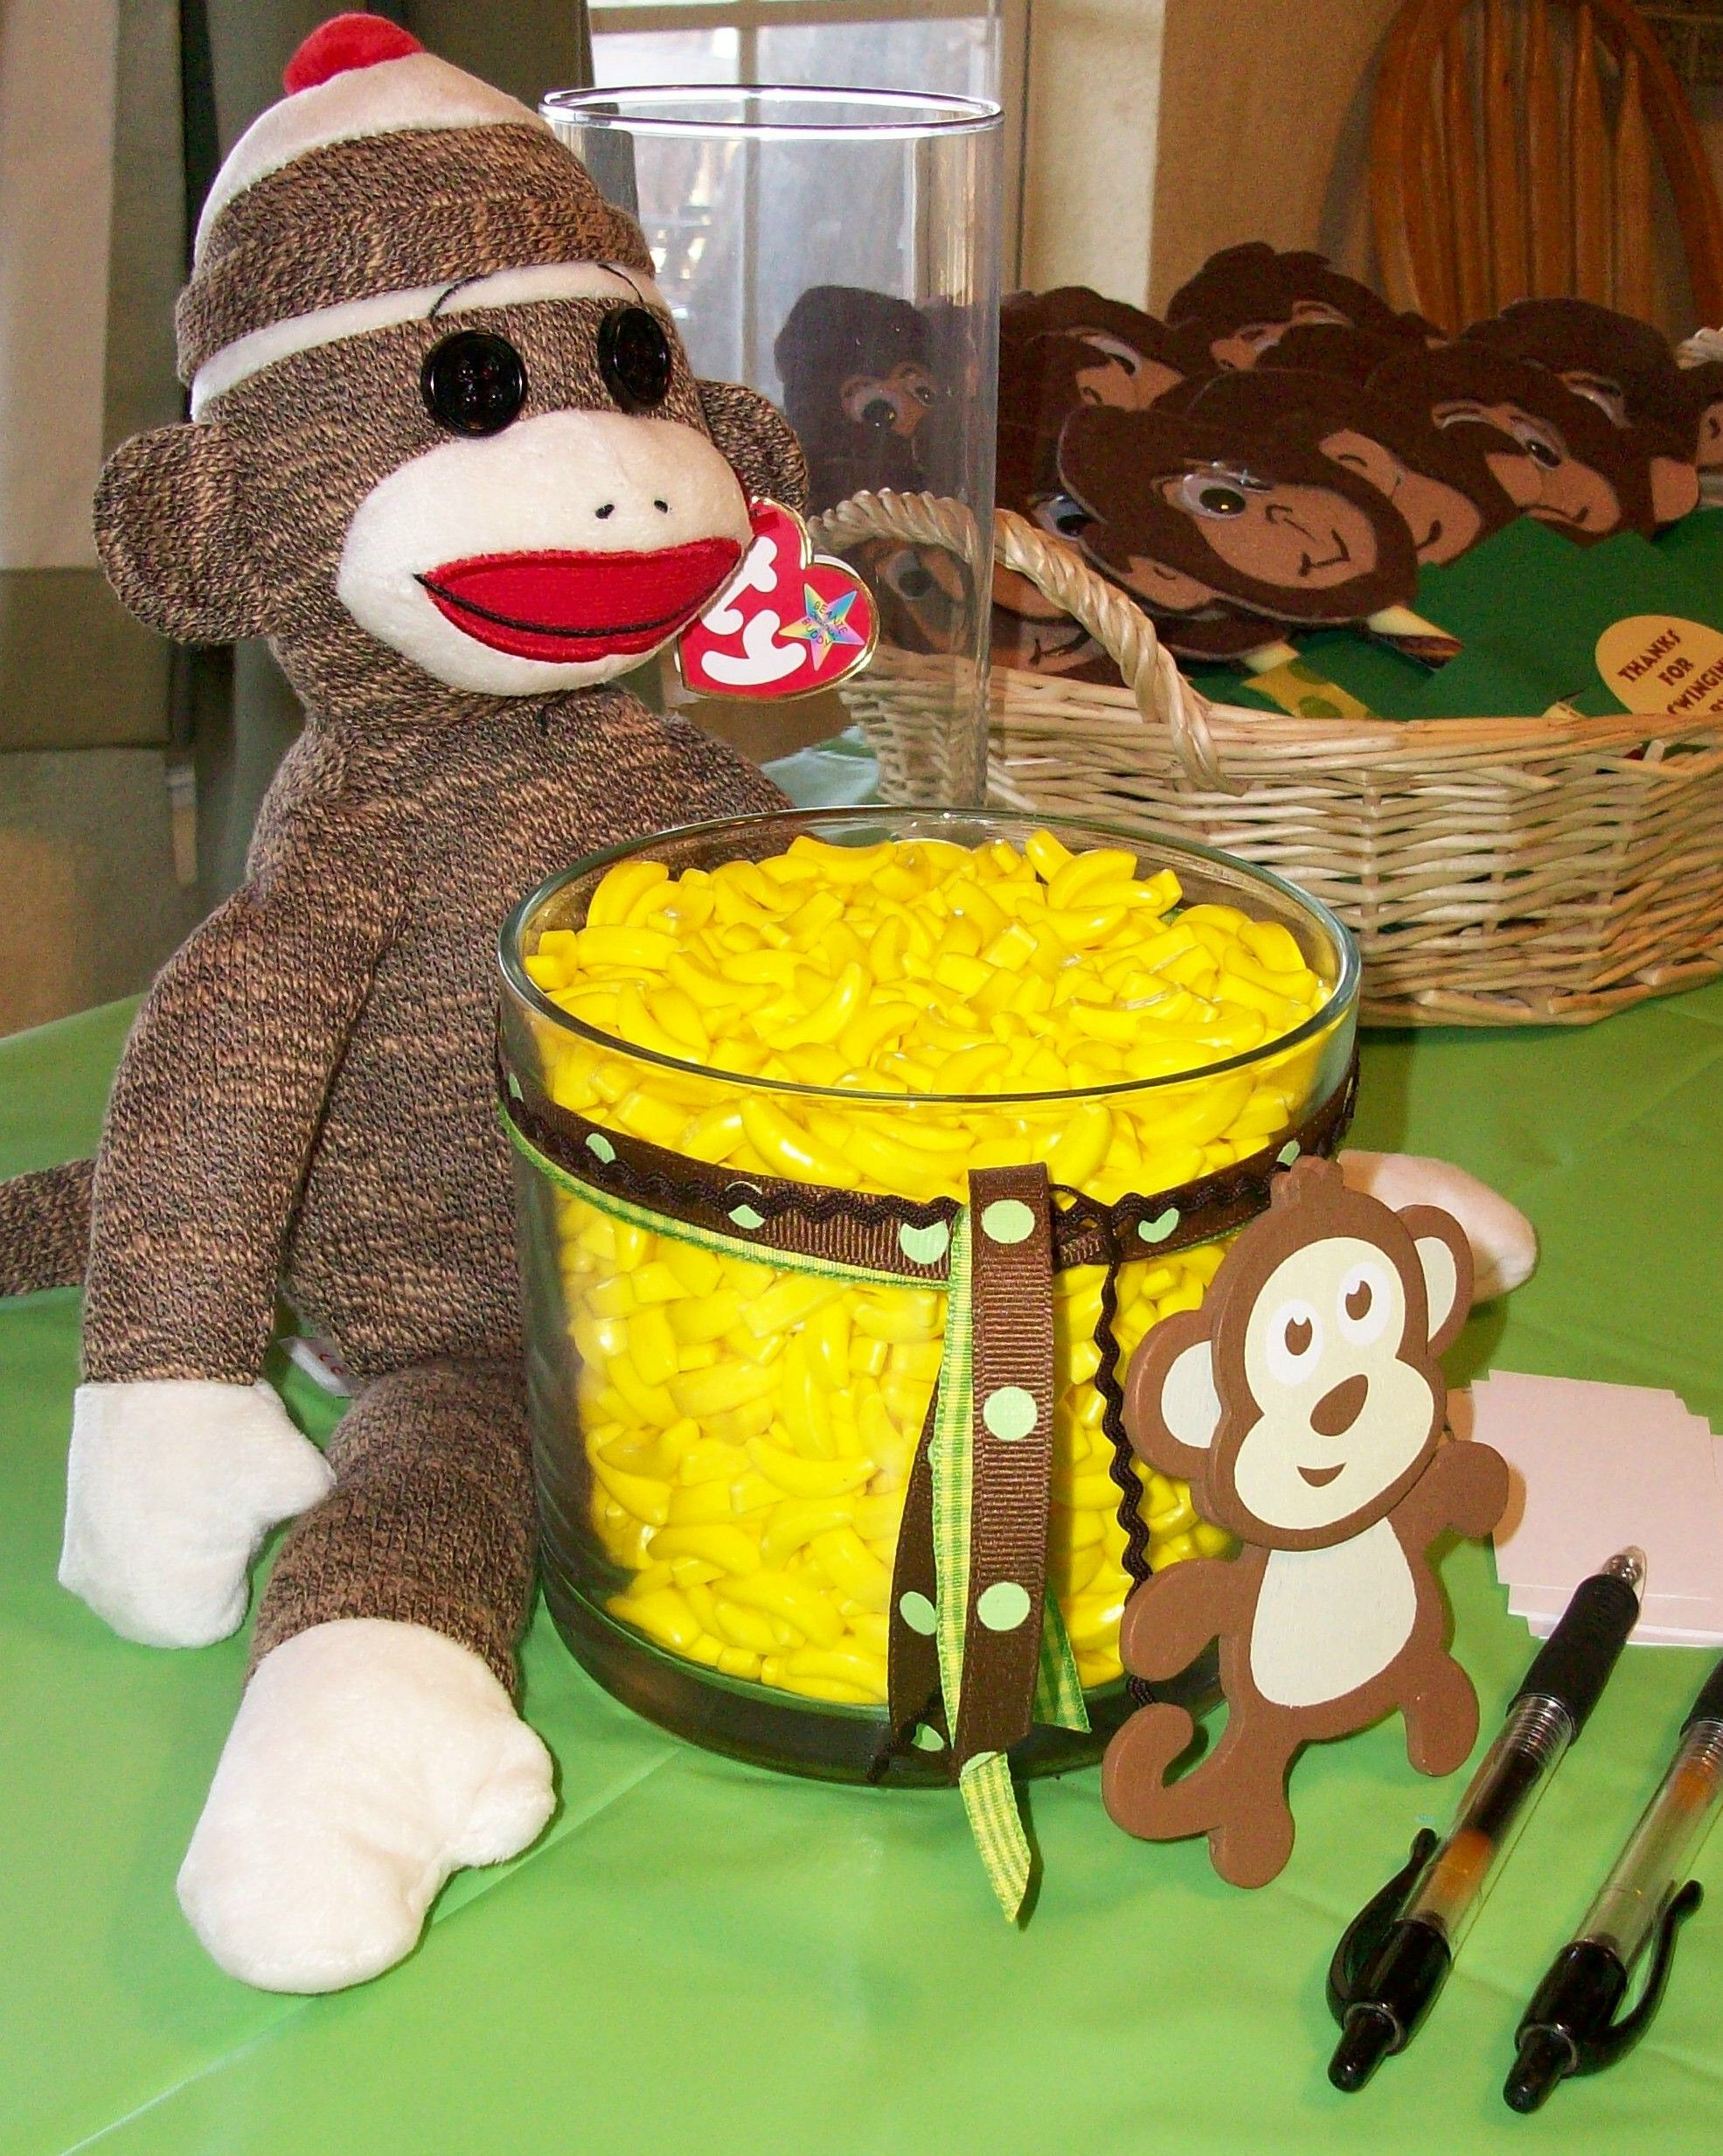 Monkey Baby Shower Decorations Party City
 Monkey Party Baby Shower Game guess how many banana